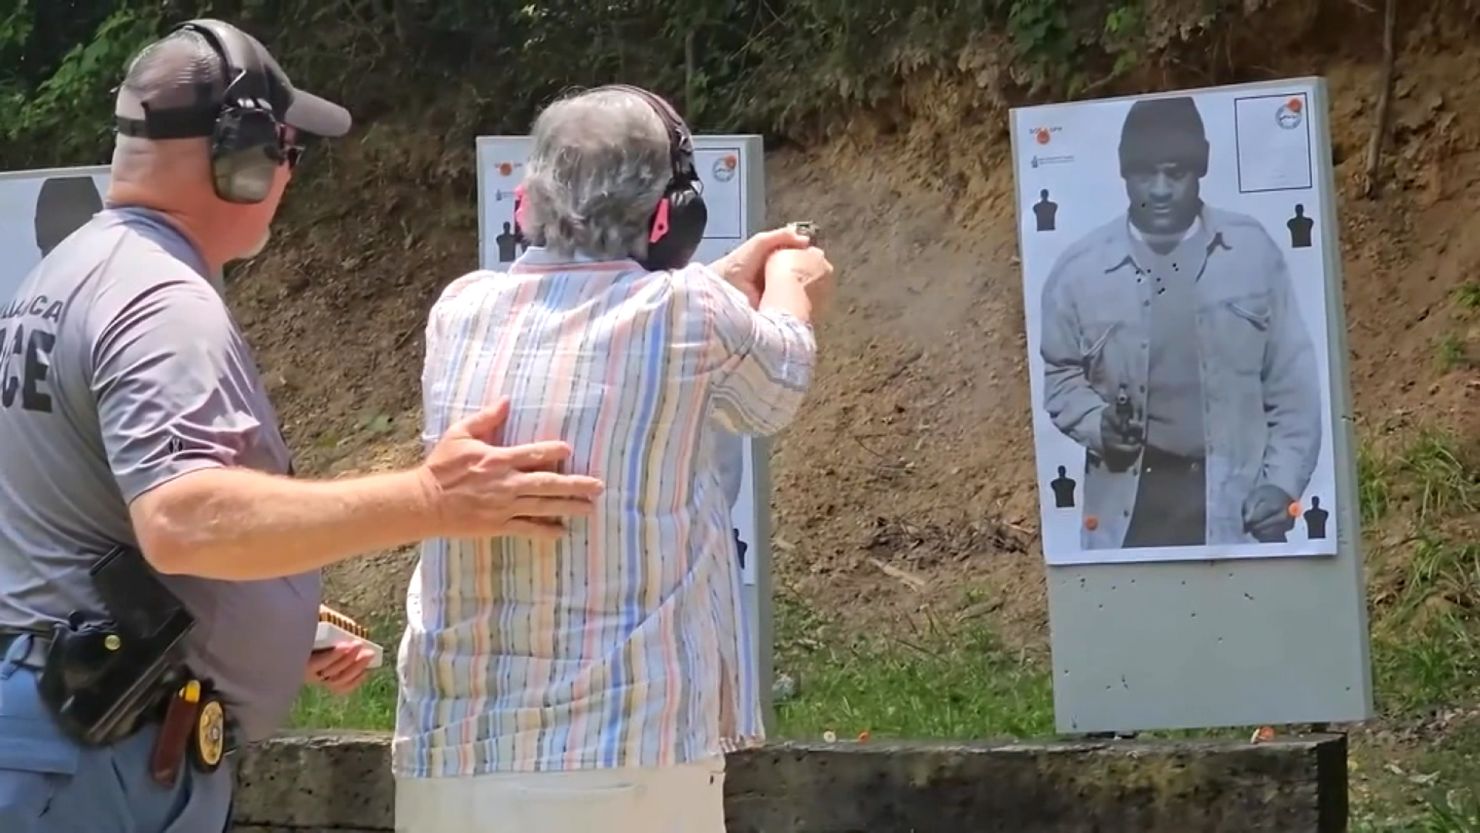 Villa Rica Mayor Gil McDougal said he is "personally embarrassed" for the training course targets, seen here in a screengrab taken from a video of the class held by the Villa Rica Police Department in Georgia.